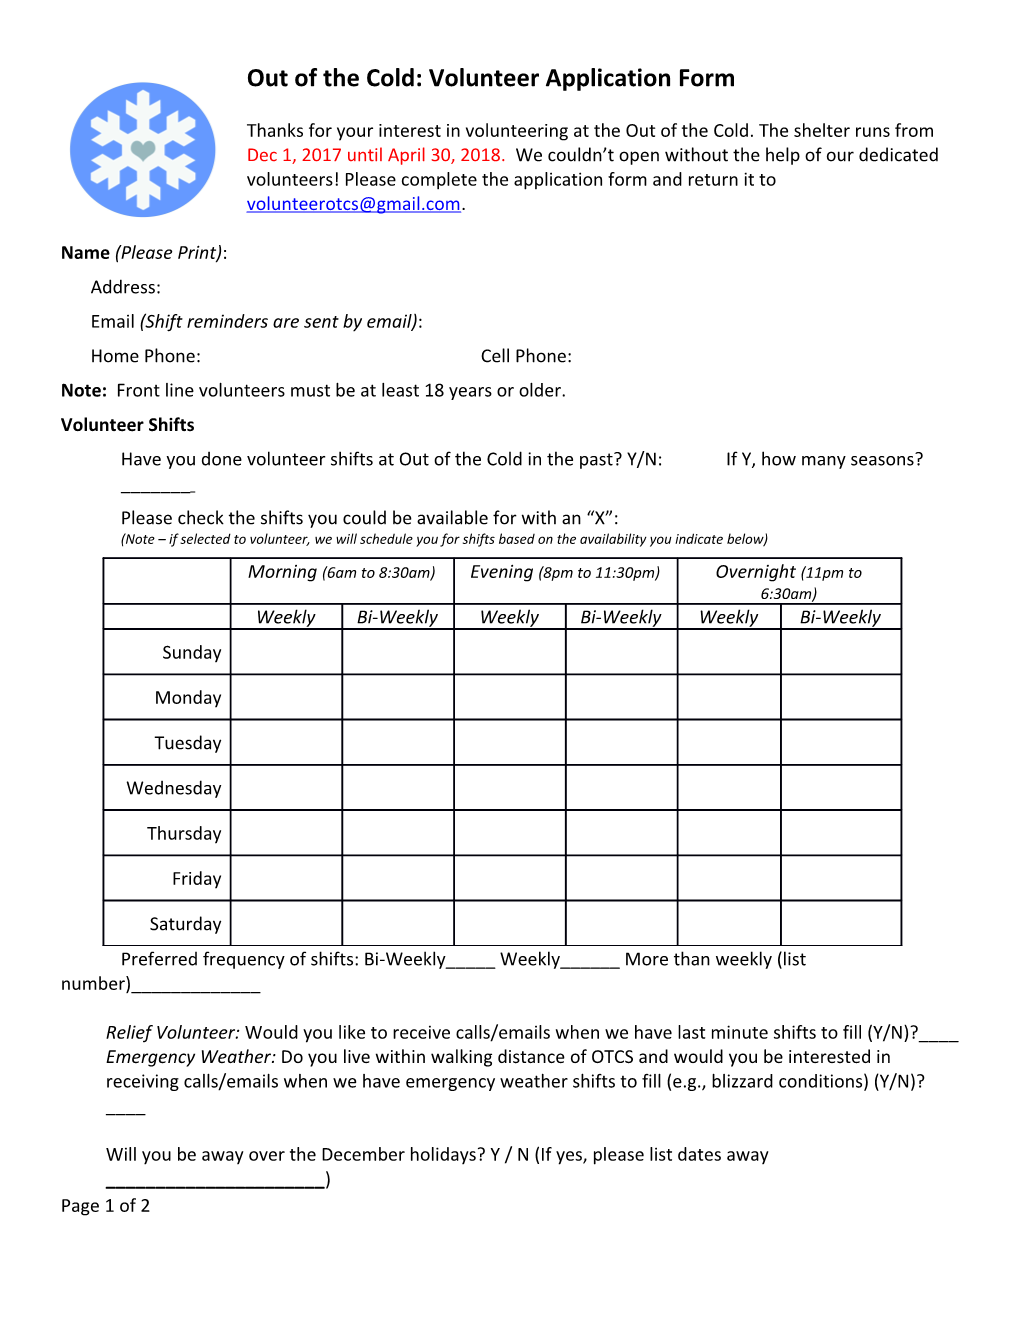 Out of the Cold: Volunteer Application Form